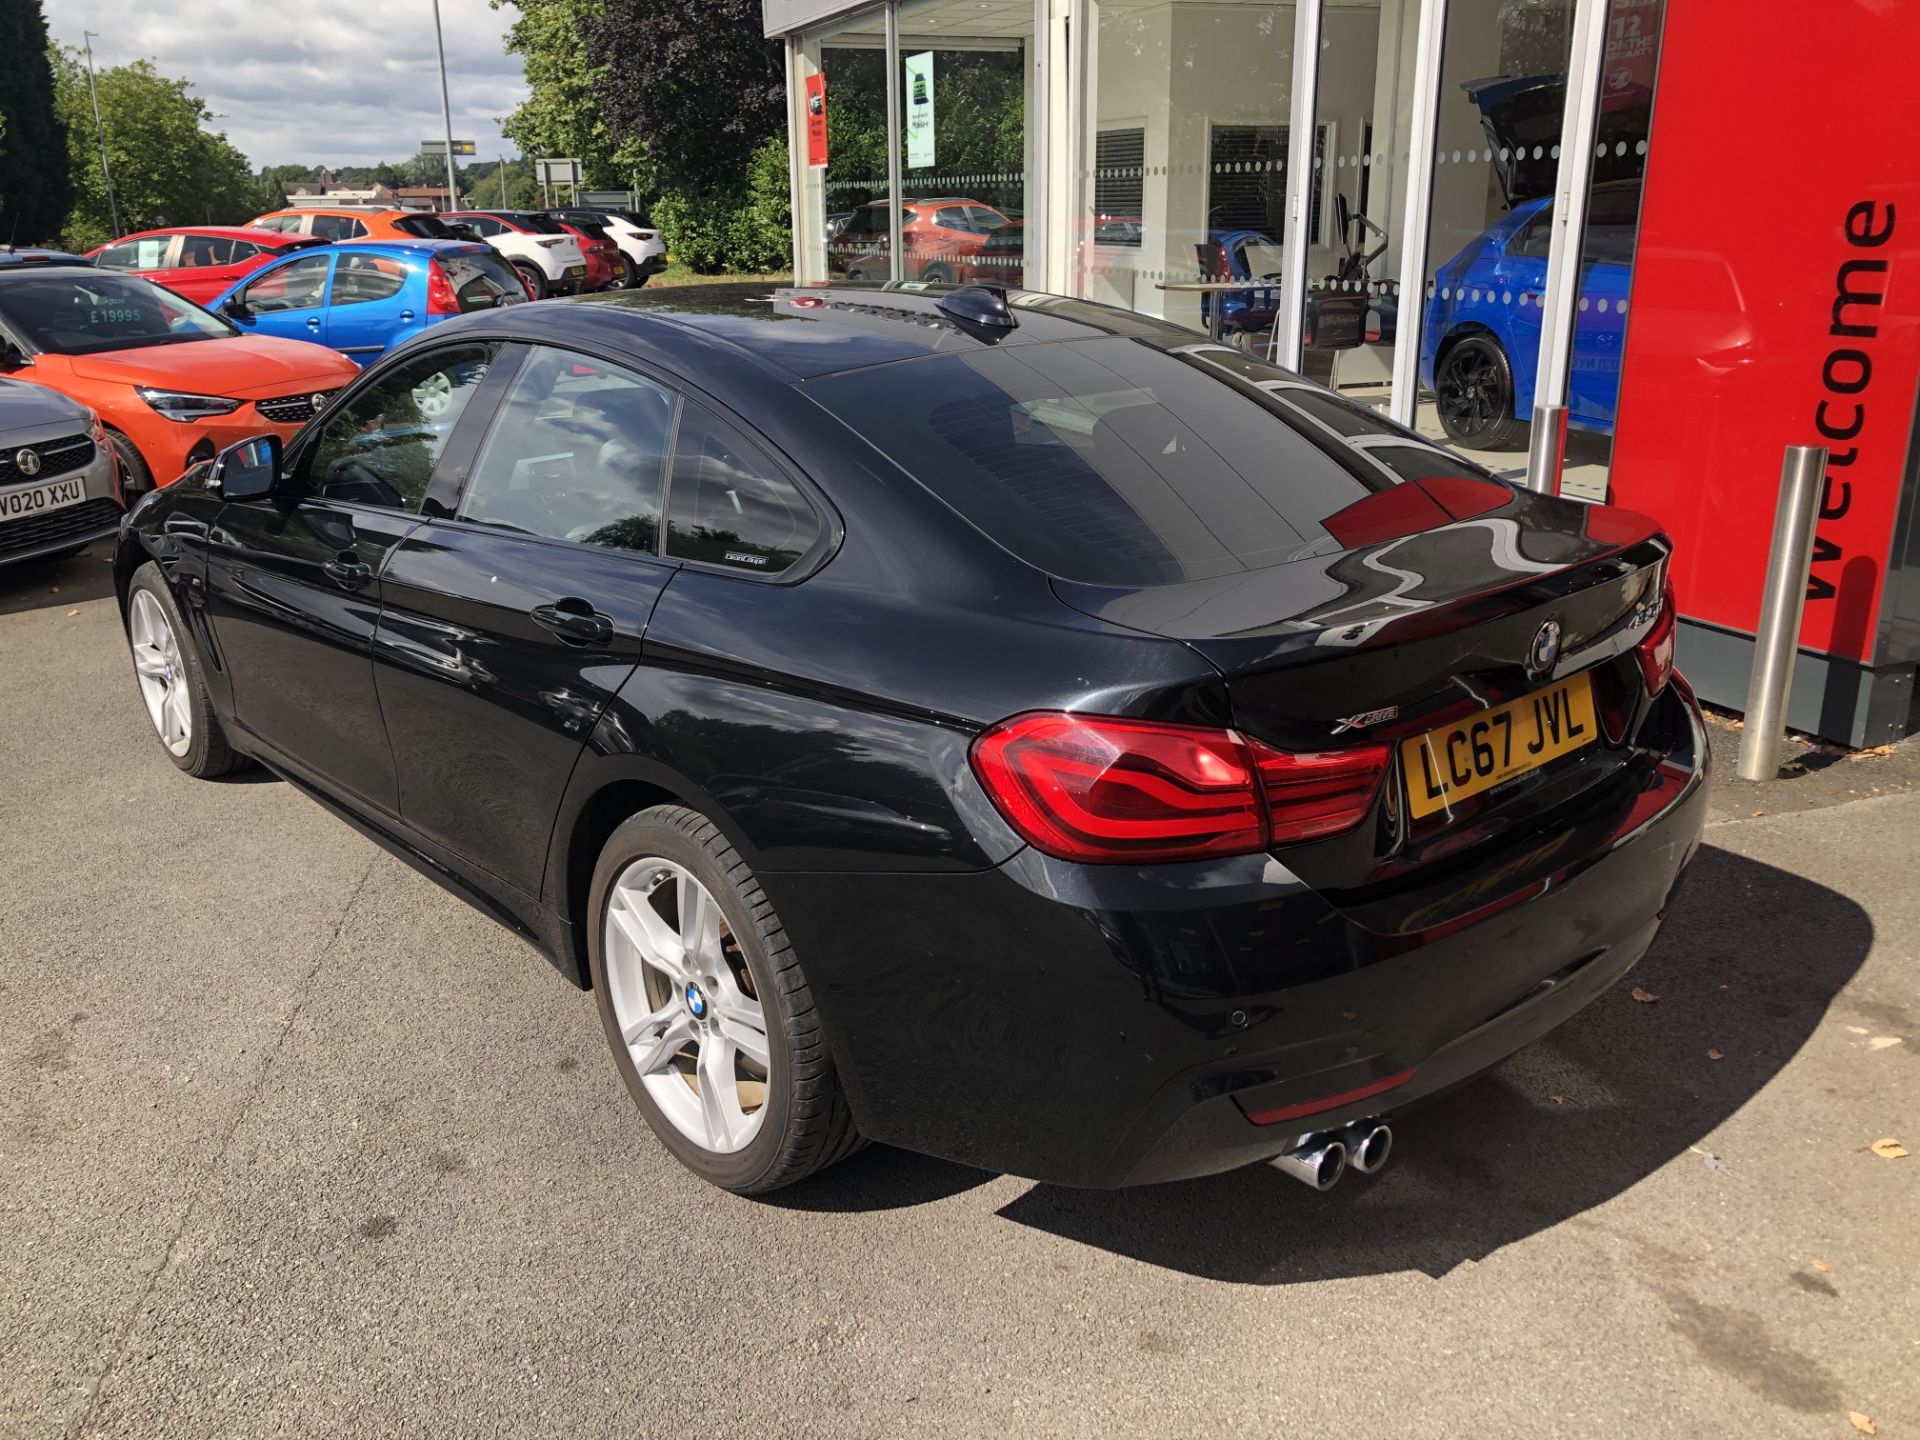 BMW 435d xDrive M Sport 5dr Automatic (Professional Media), Registration: LC67JVL, Date First - Image 5 of 7